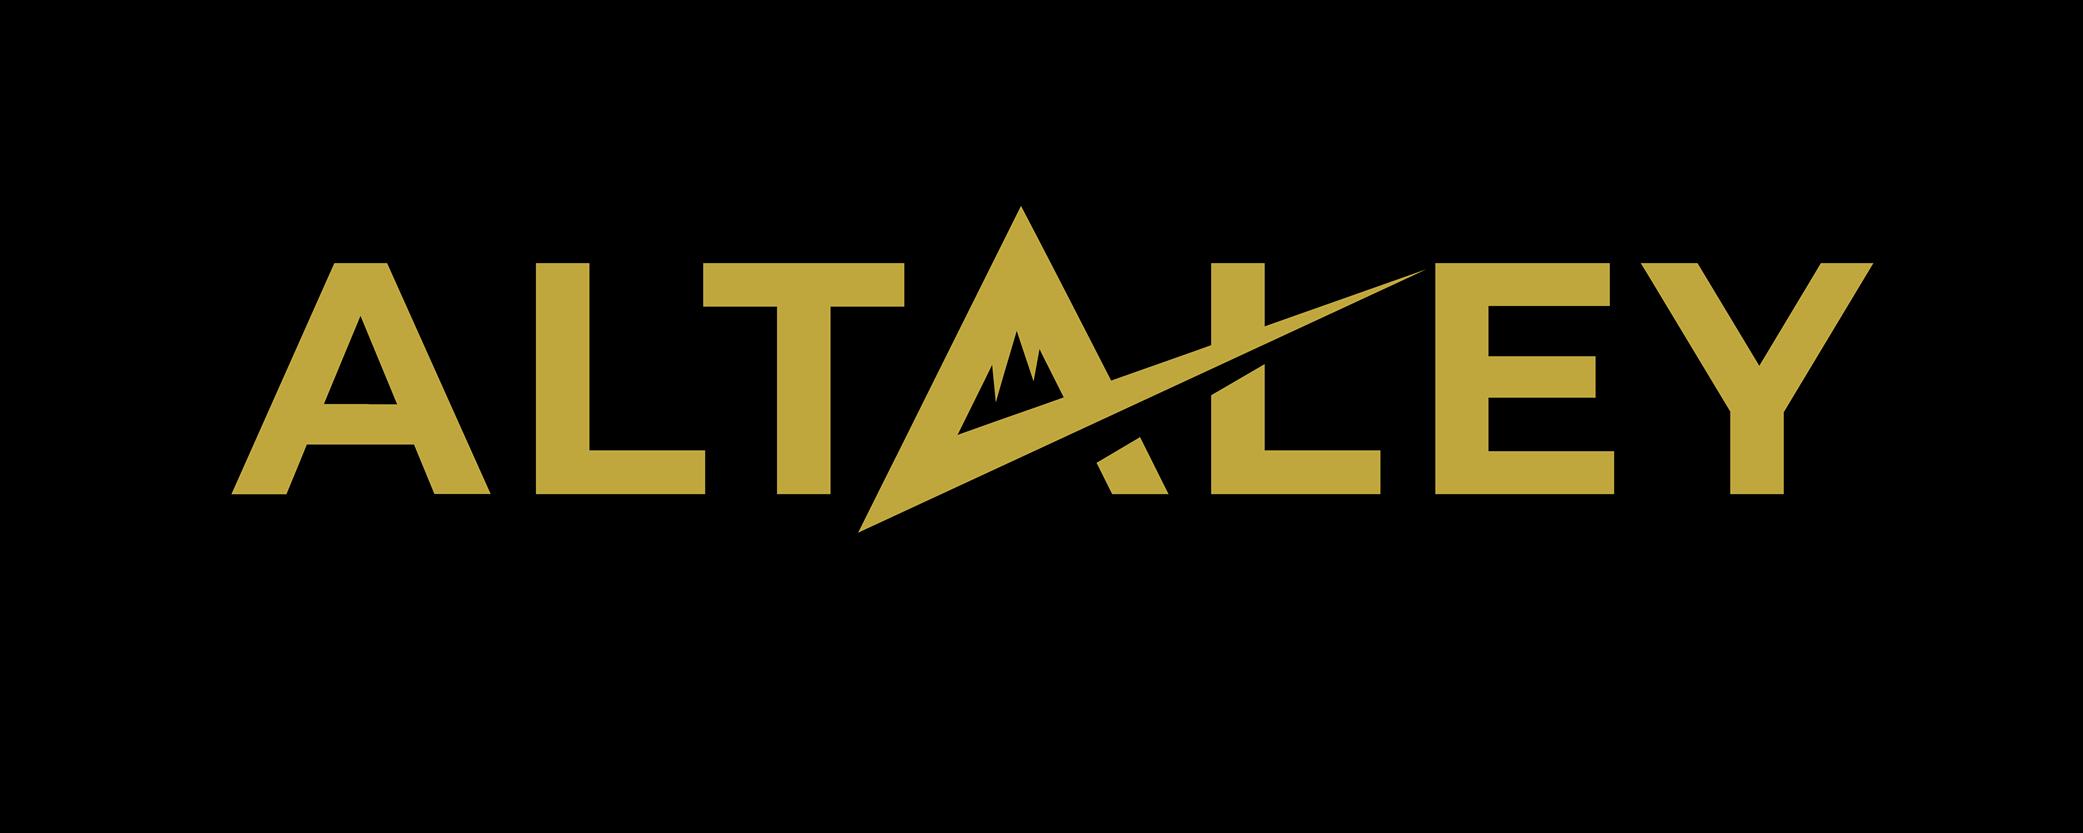 Altaley Mining Corporation Announces Results Of Annual General Meeting, Management Changes, Effective Date For Name Change And Provides Update On Review Of Contingent Liabilities